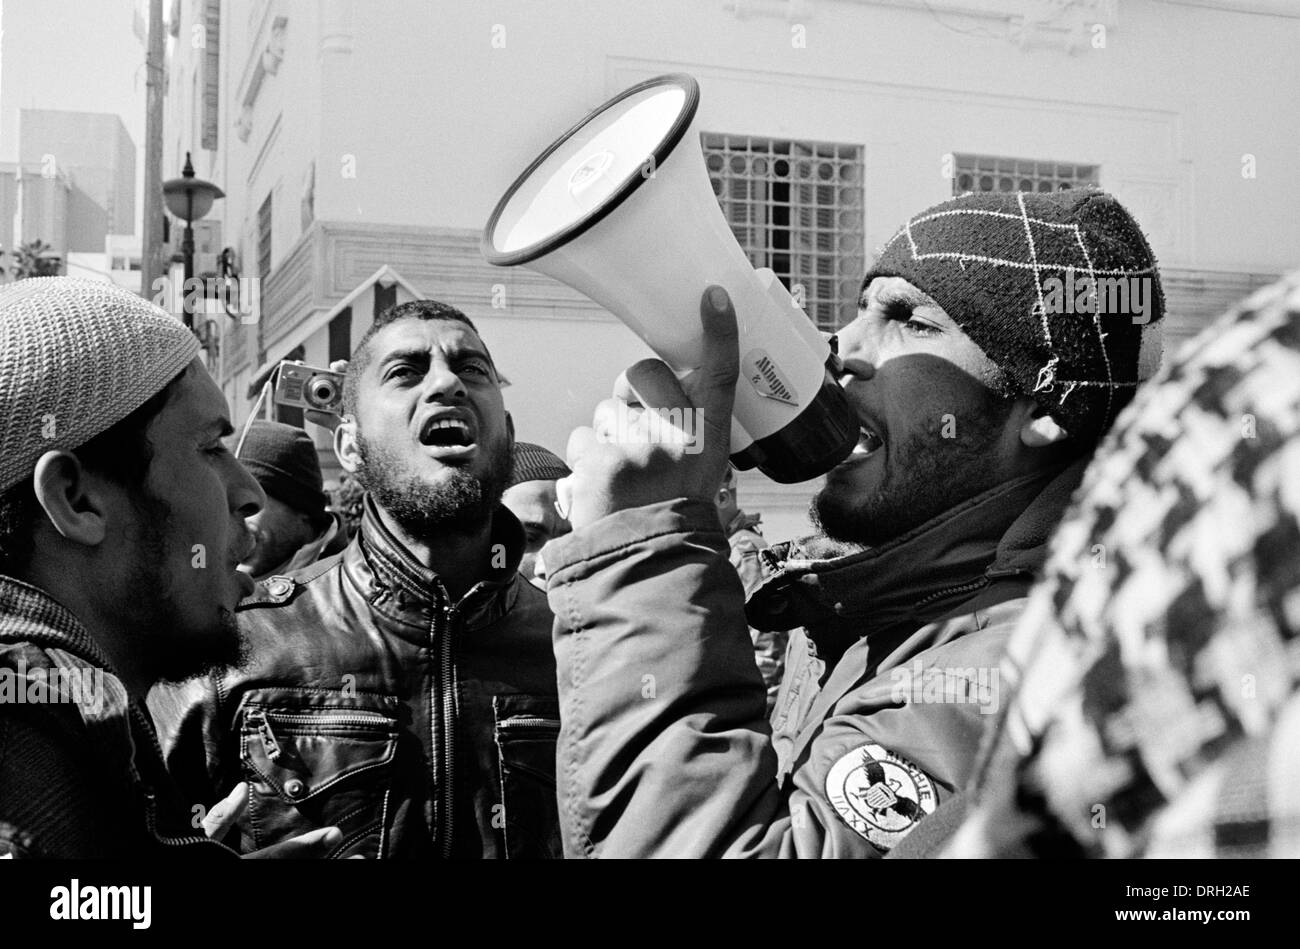 Tunisian Unrest in front of the interior ministry building in Tunis the capital. Military monitoring the protest and violence Stock Photo